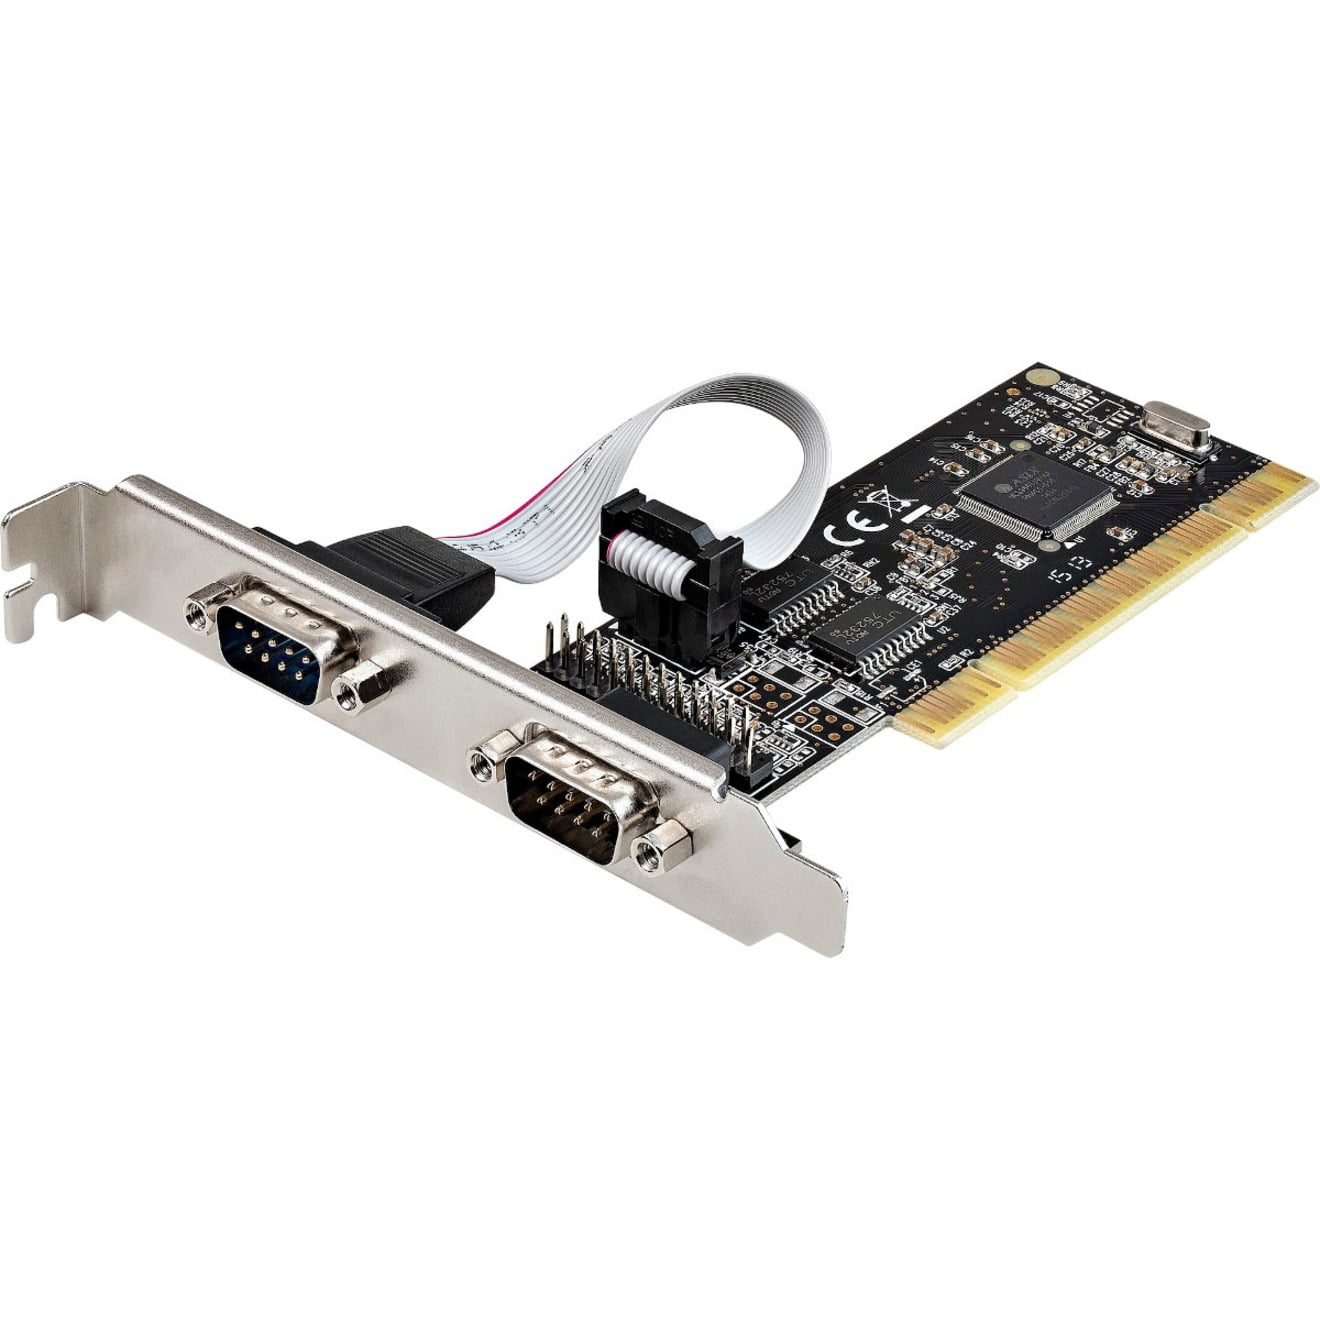 posponer Comprimido Peregrino StarTech PCI Serial Parallel Combo Card with Dual Serial RS232 Ports (DB9)  & 1x Parallel Port (DB25), PCI Adapter Expansion Card - Walmart.com